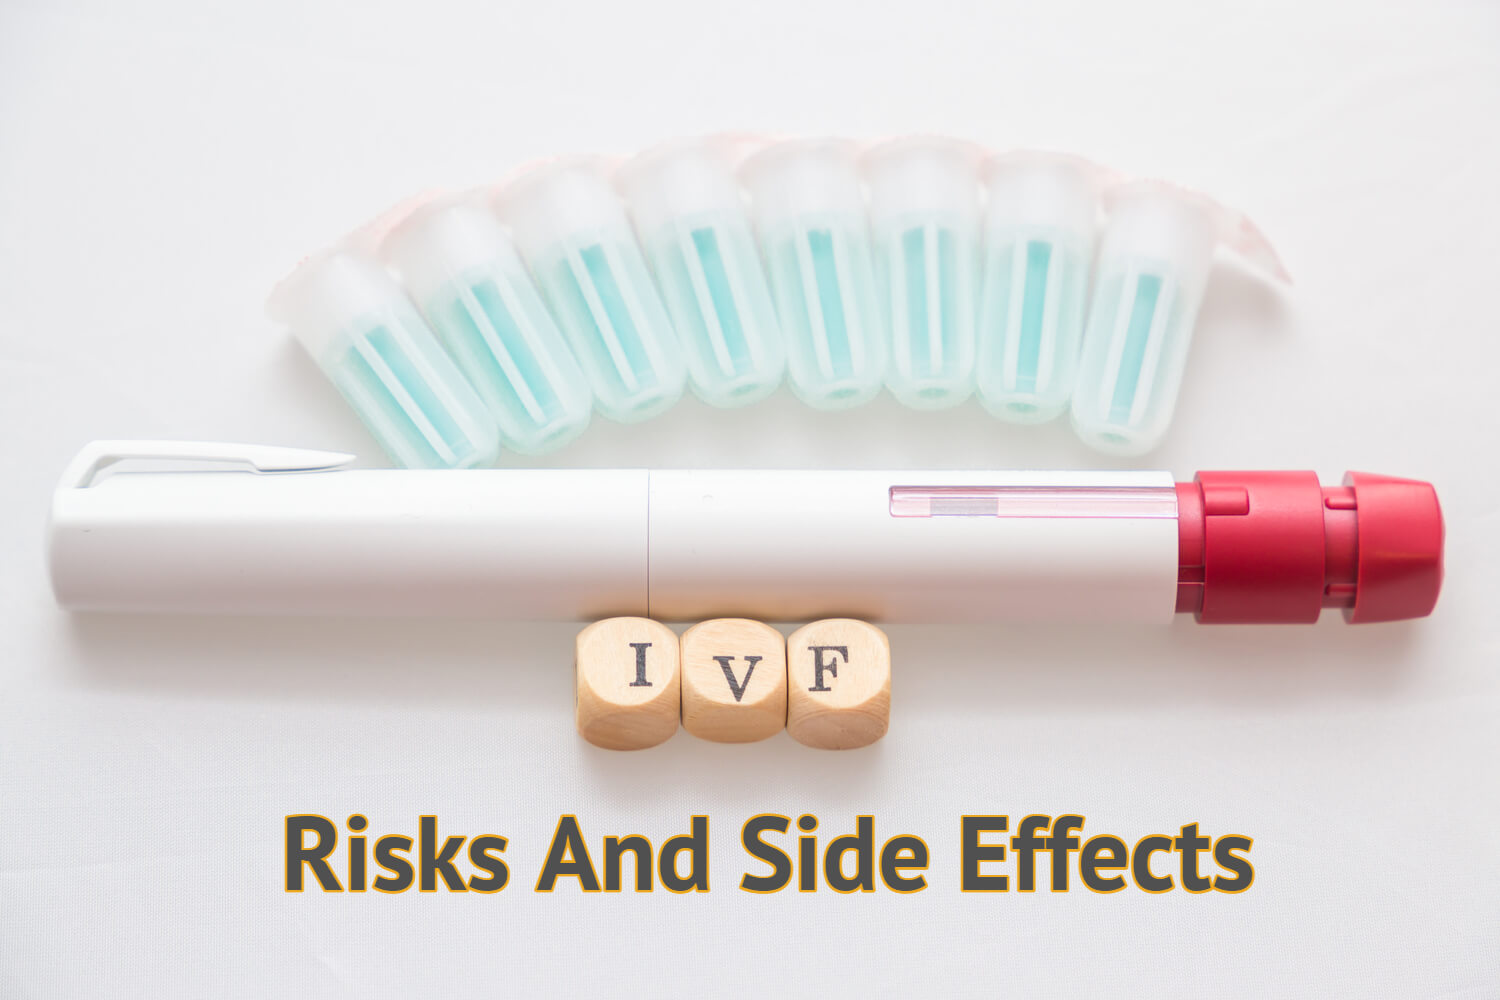 IVF Risks And Side Effects